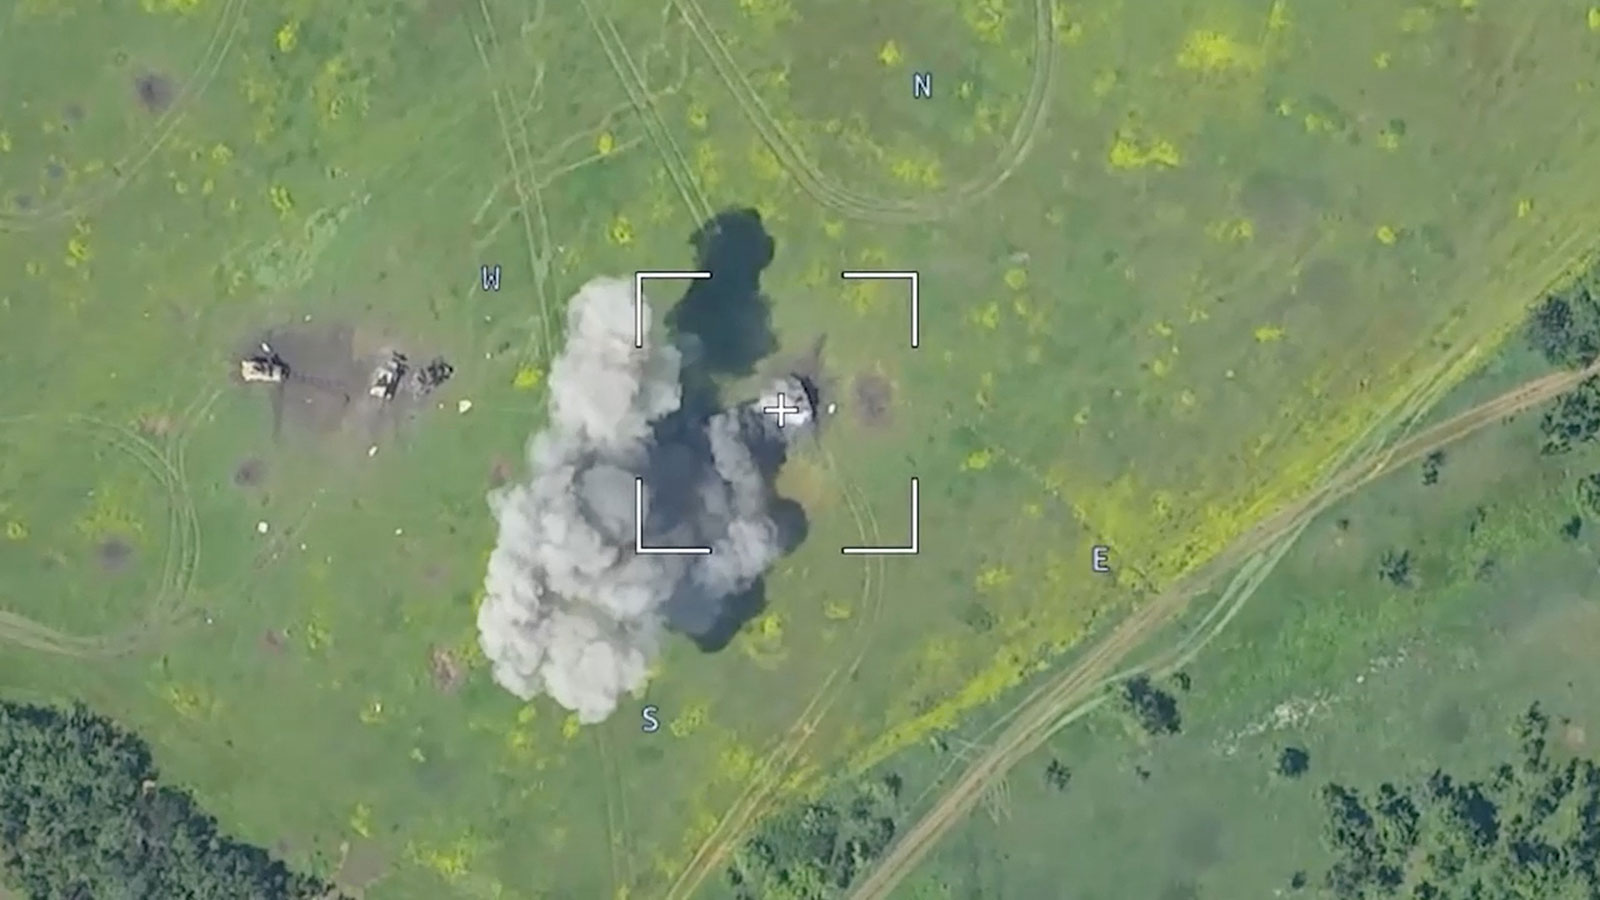 Drone footage, released soonJune 5 by the Russian Defense Ministry shows a burning armoured vehicle in an unidentified location.